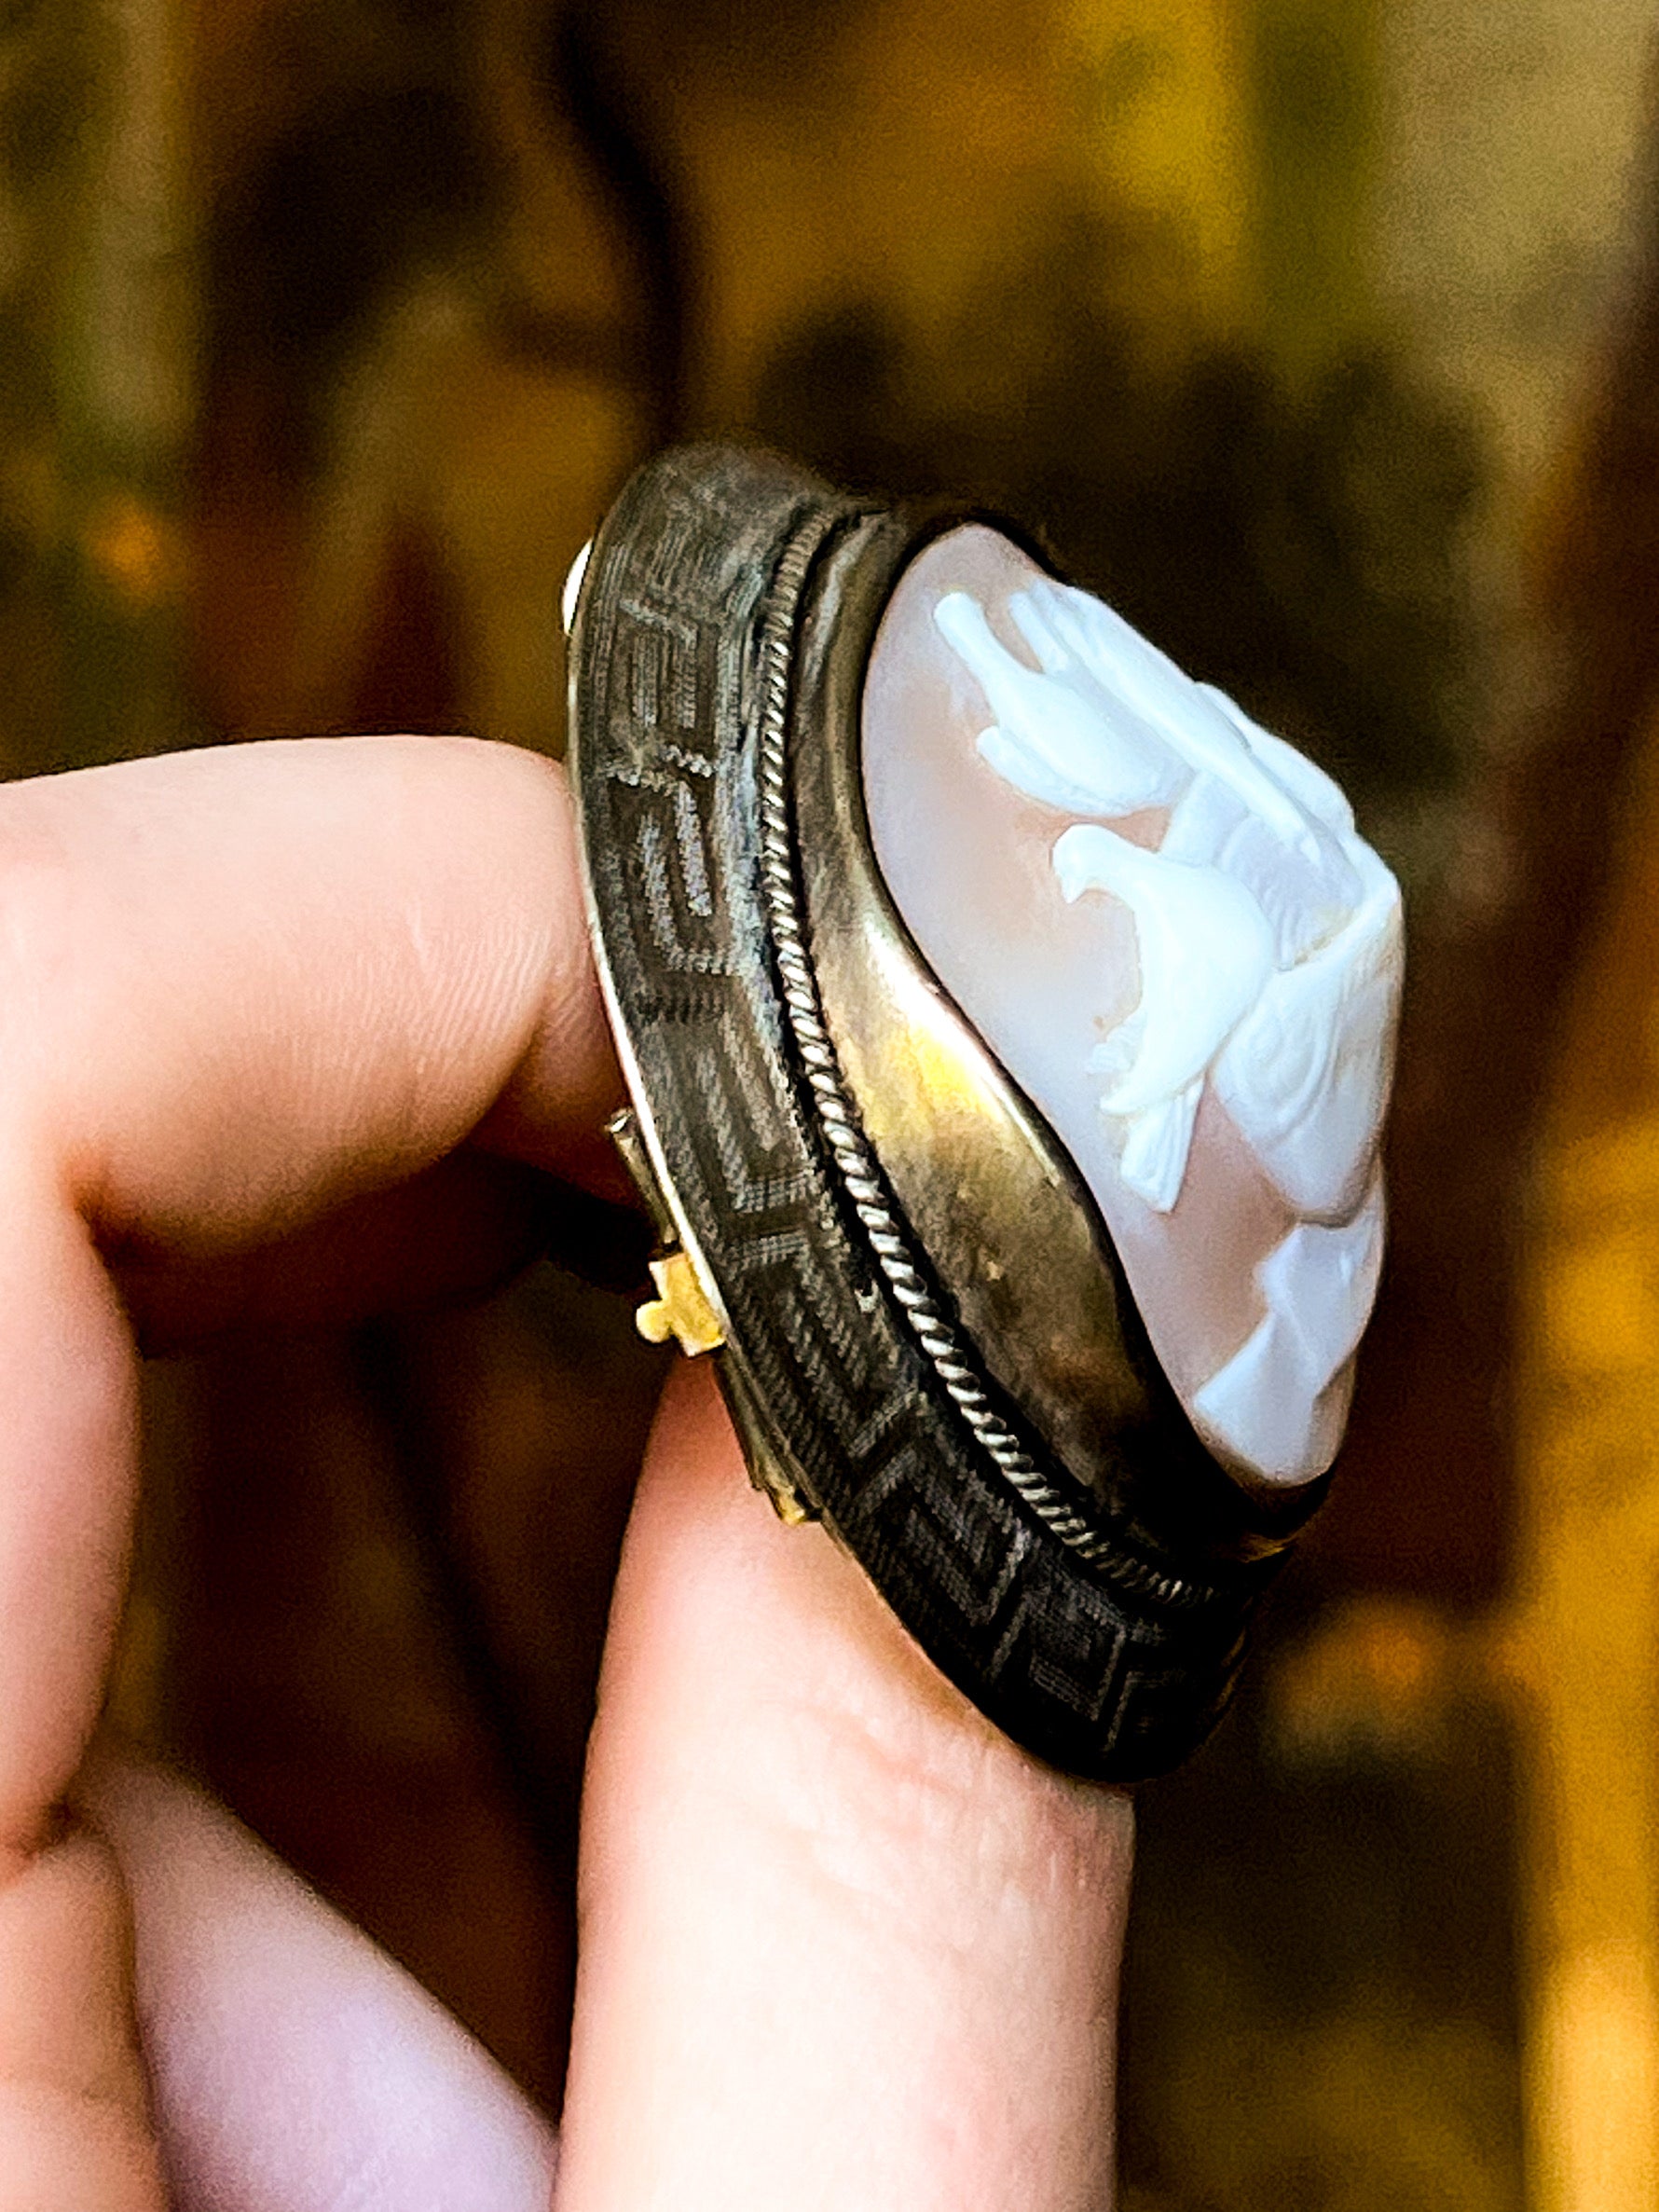 Large Scale Victorian Cameo Featuring Pliny's Doves